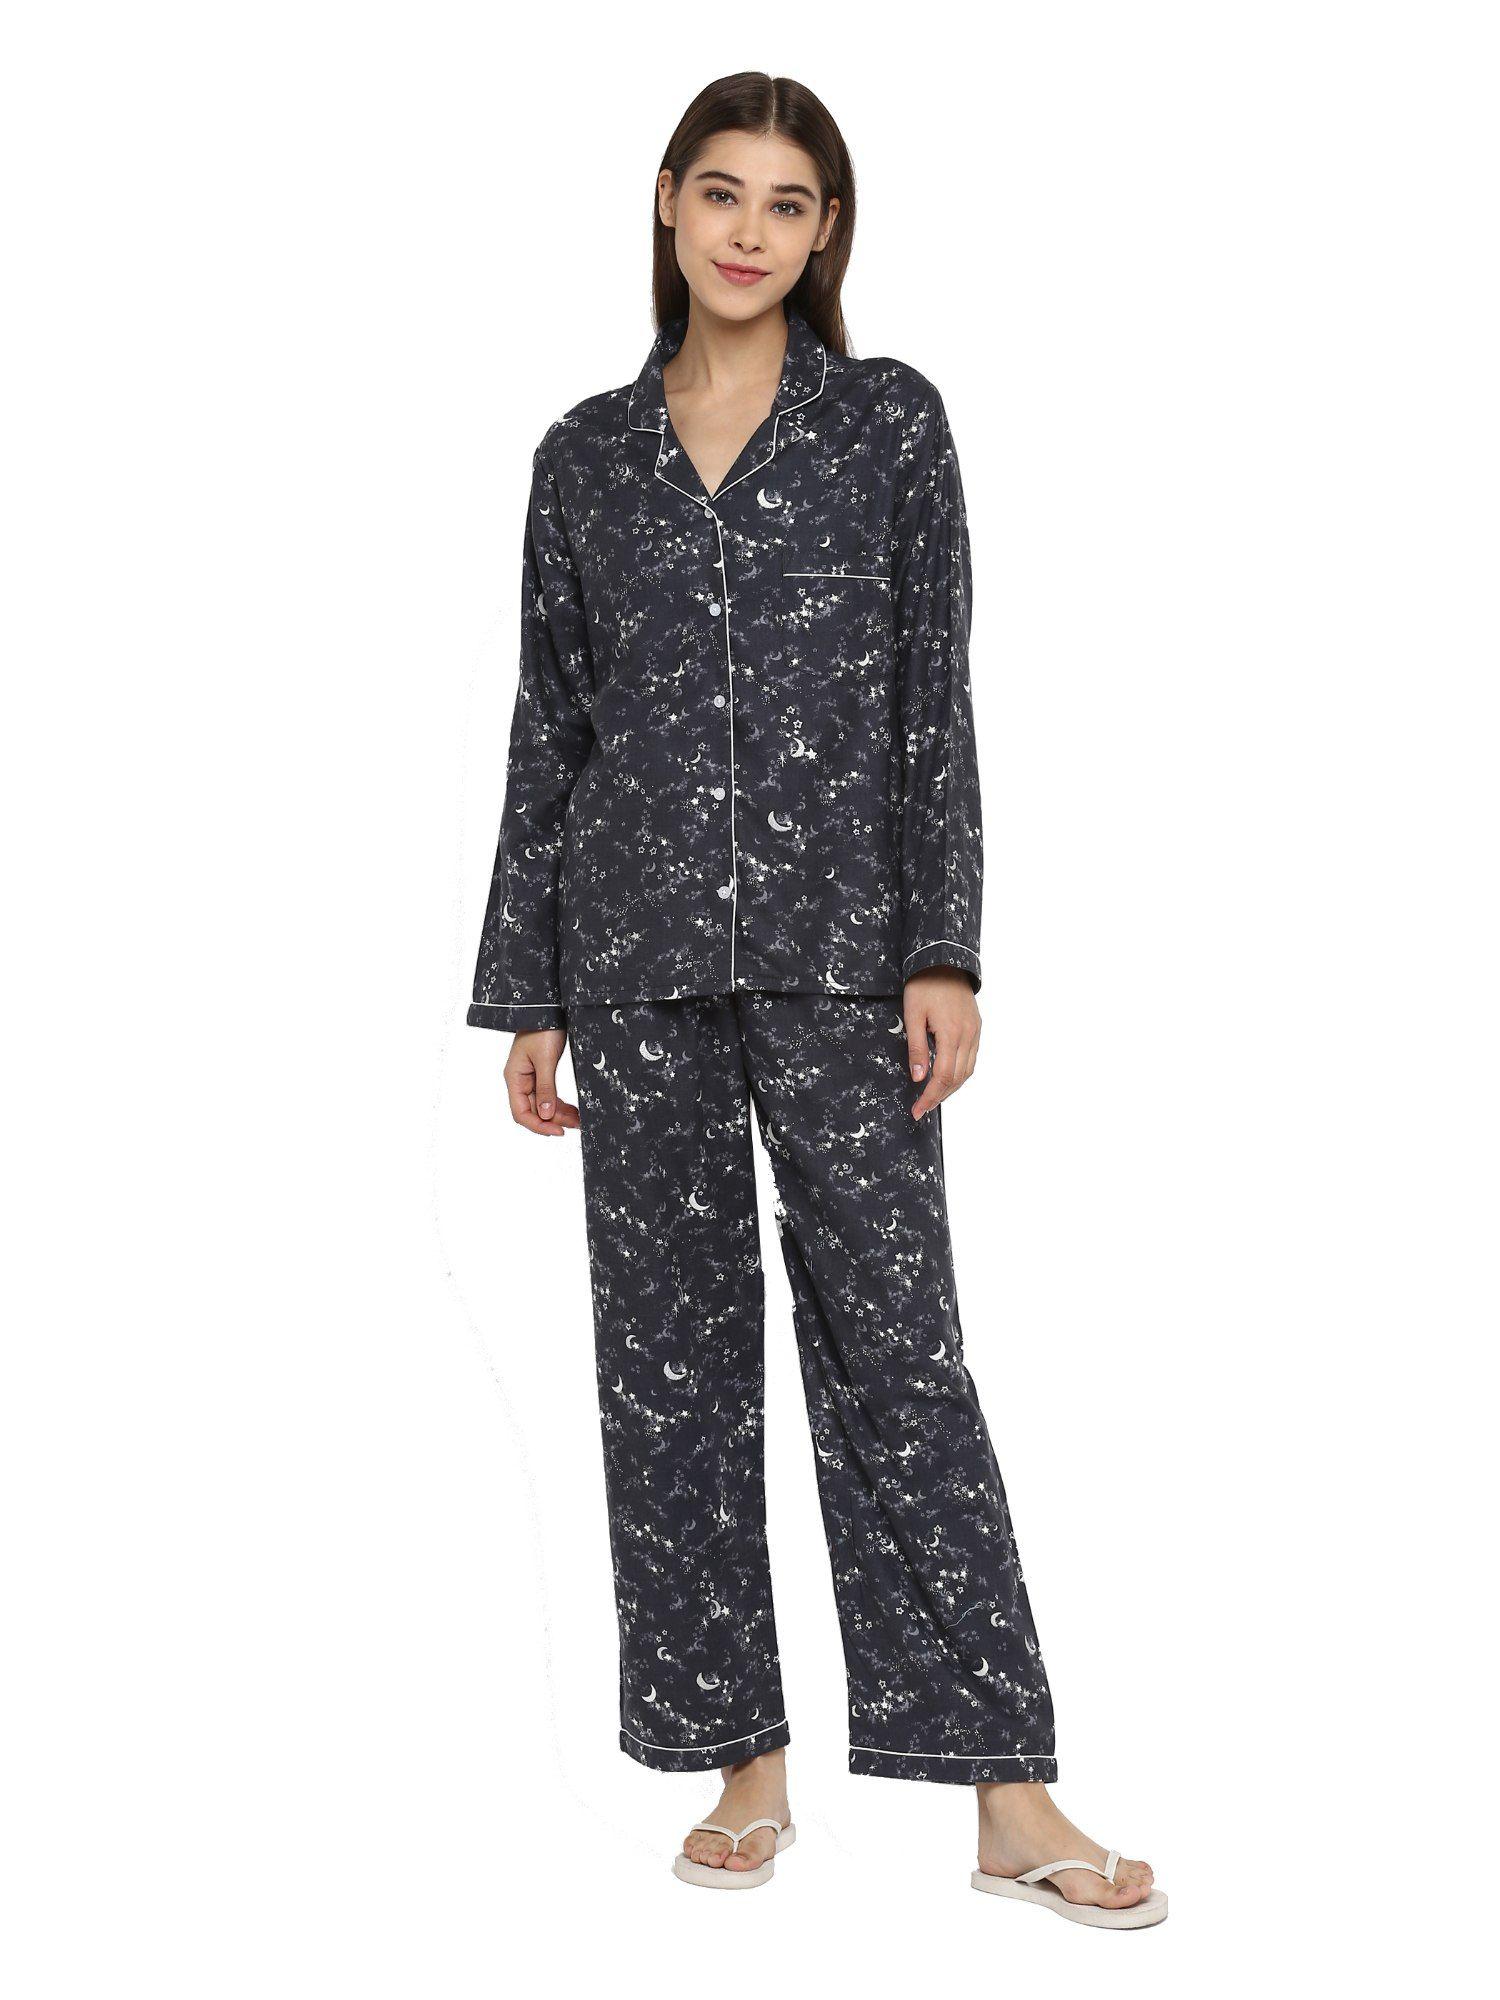 cotton-flannel print | long sleeve with pajama set | women's night suit - grey